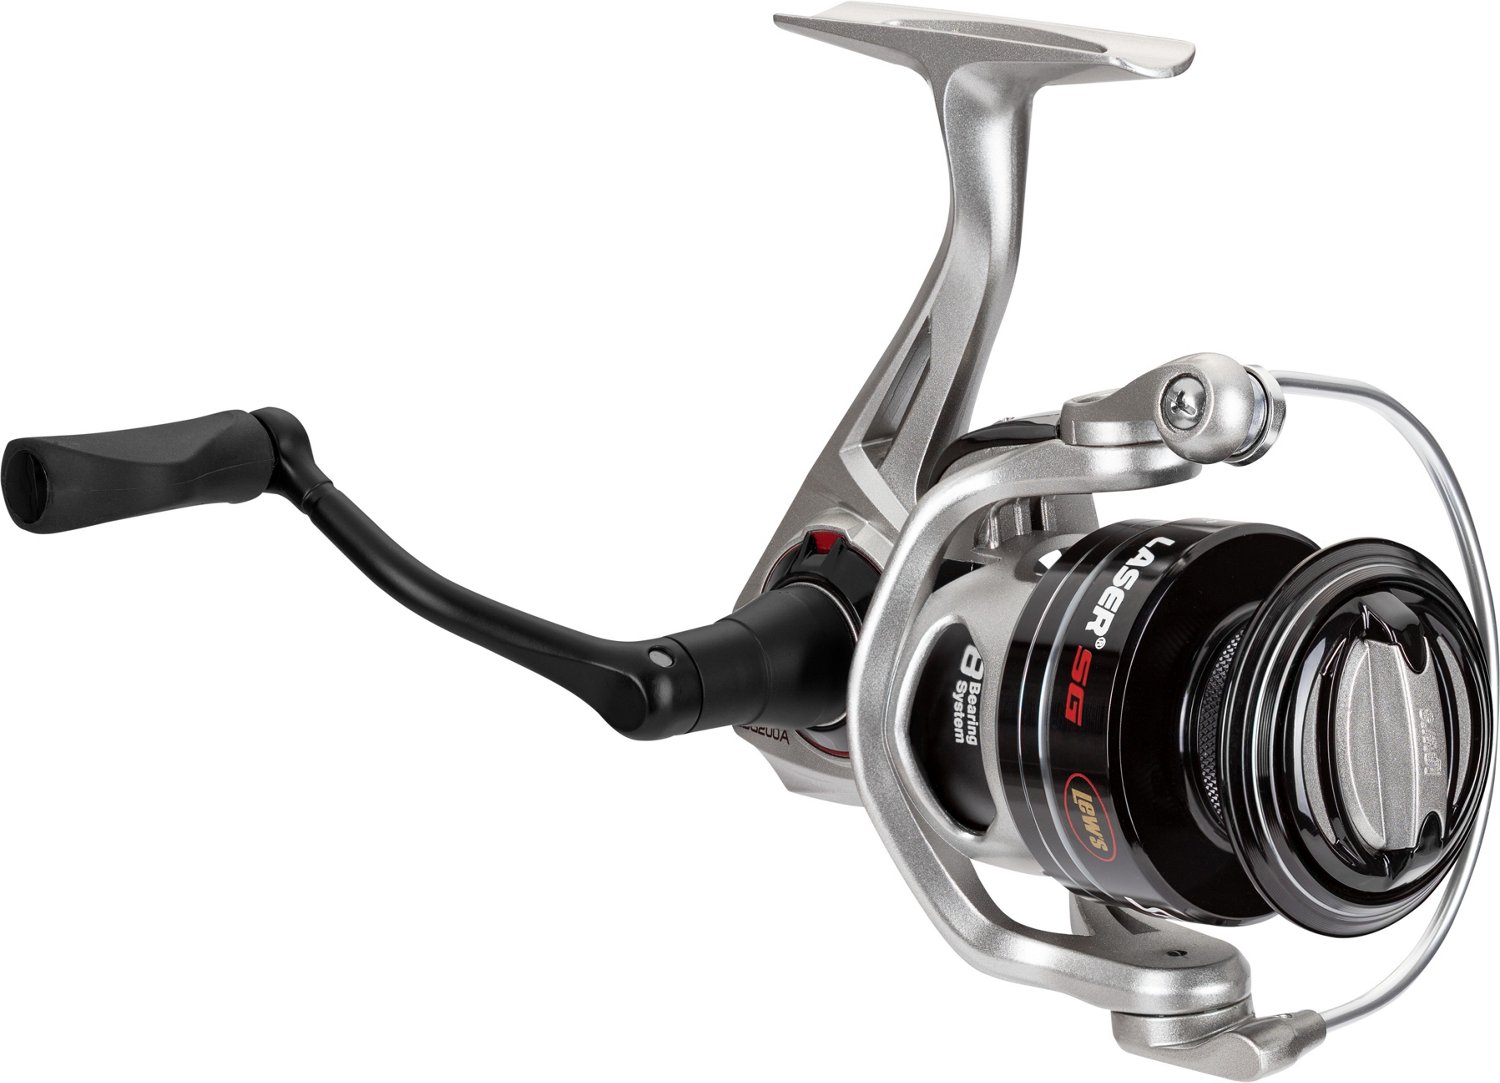 HI-TECH LAZER LZF-25S SILVER SPINNING REELS FOR CRAPPIE POLE FISHING 2BB